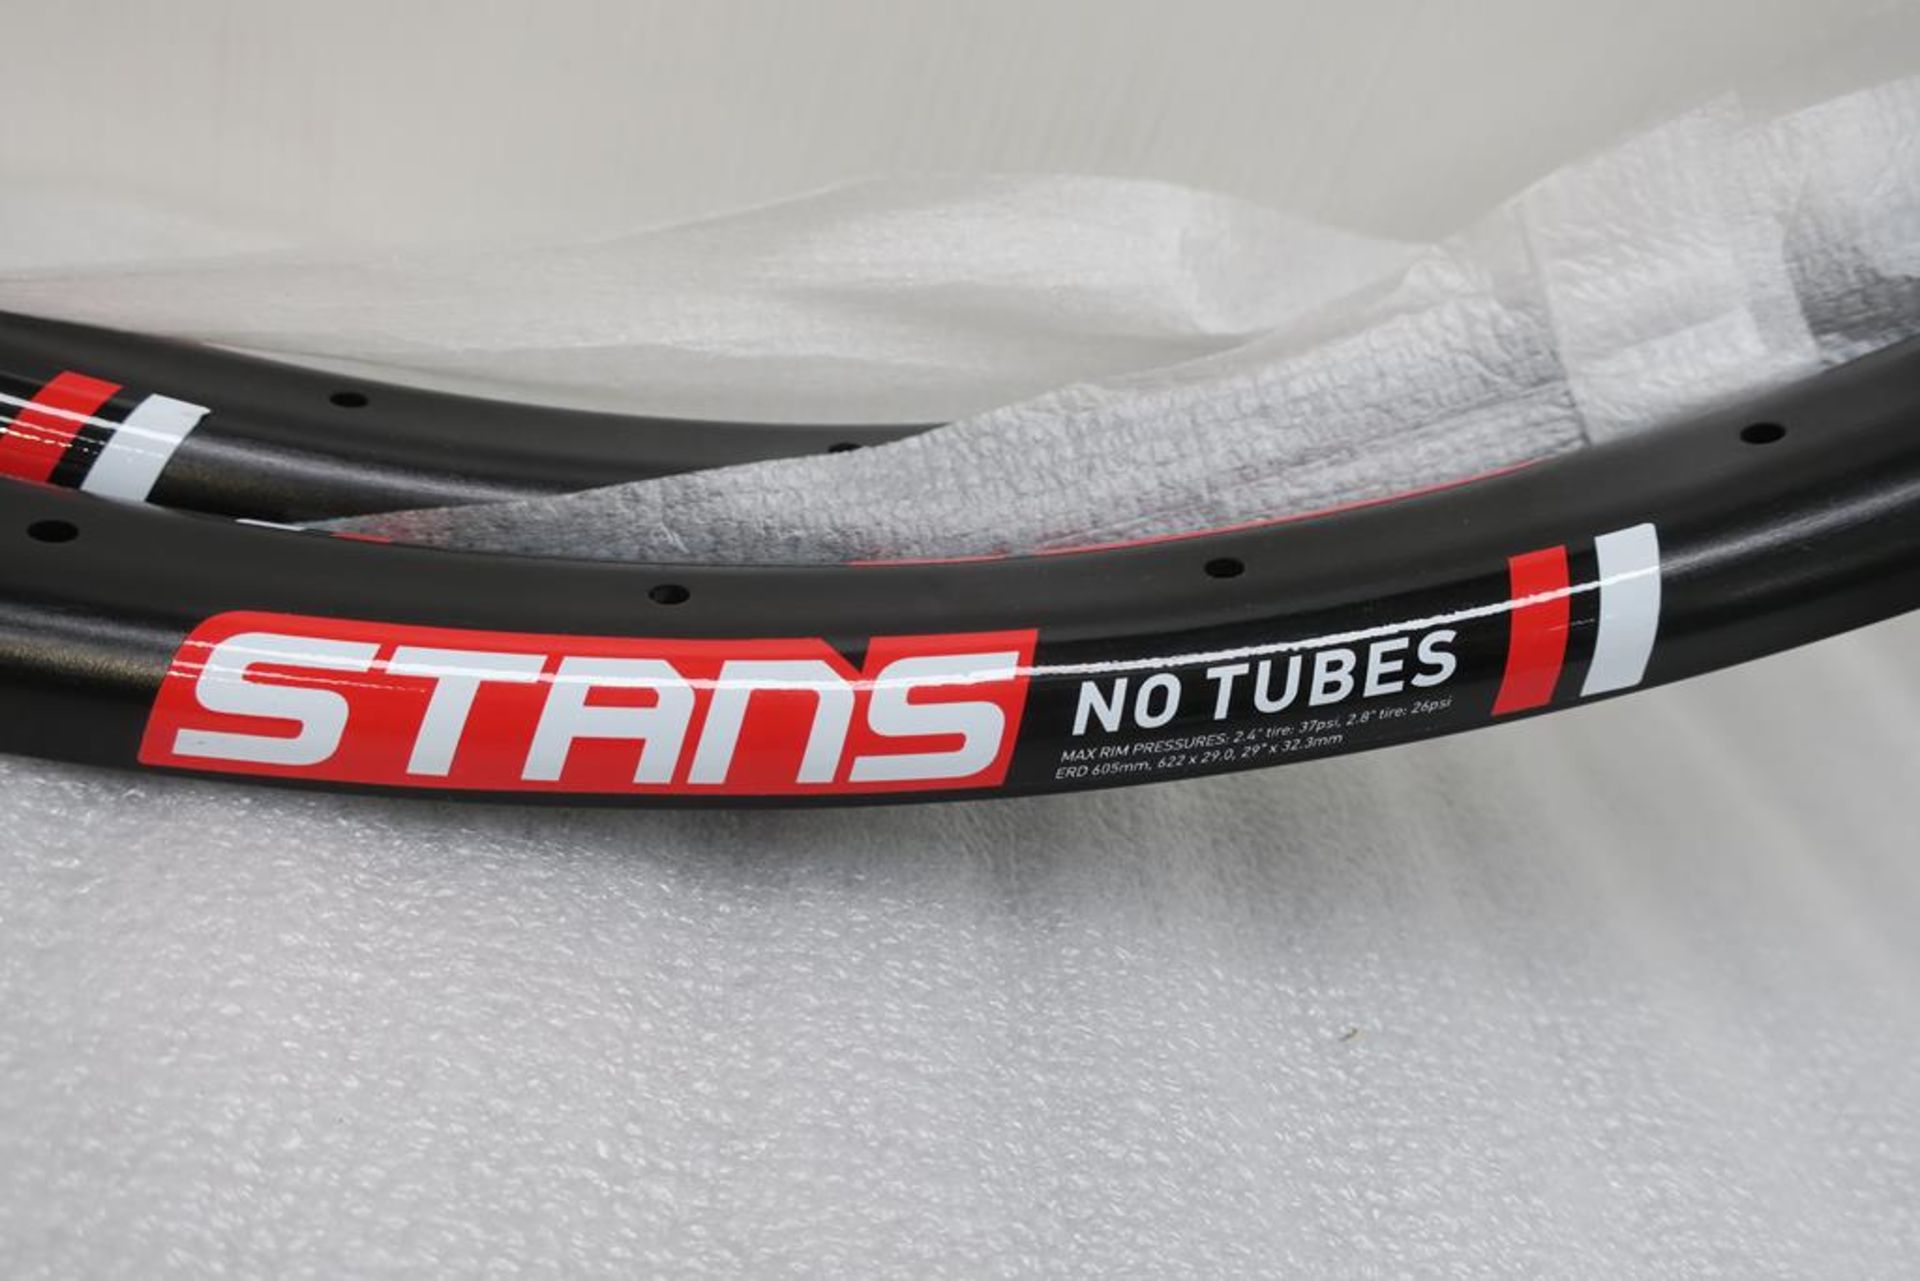 A Pair of New Stans 'No Tubes' ZTR Flow MK3 Rims (29 32H) - Image 2 of 9